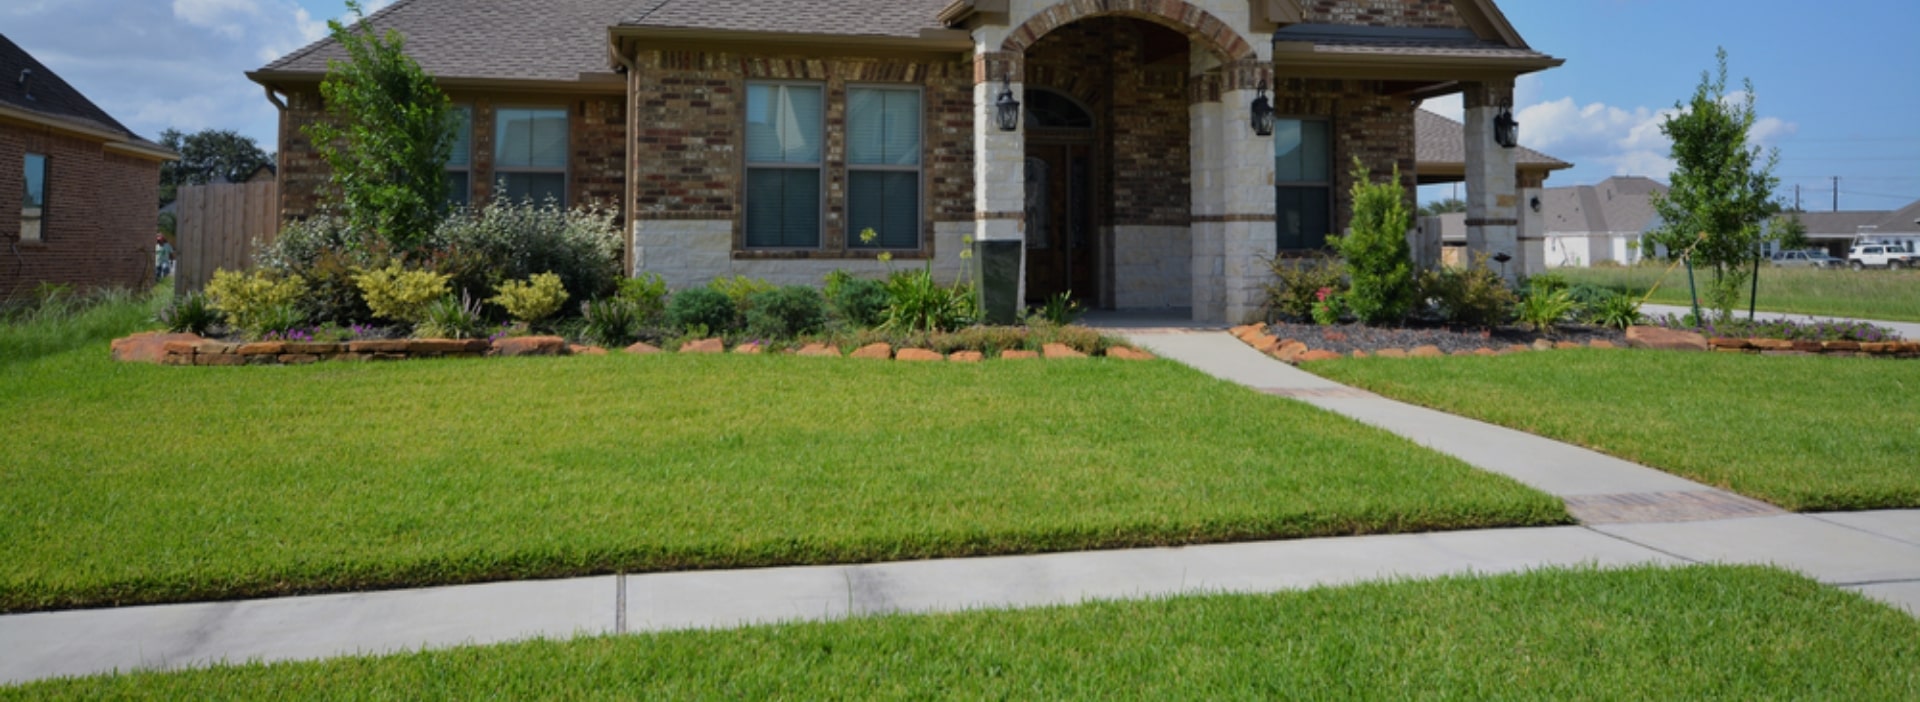 Residential Lawn Mowing Service Plans In Texas